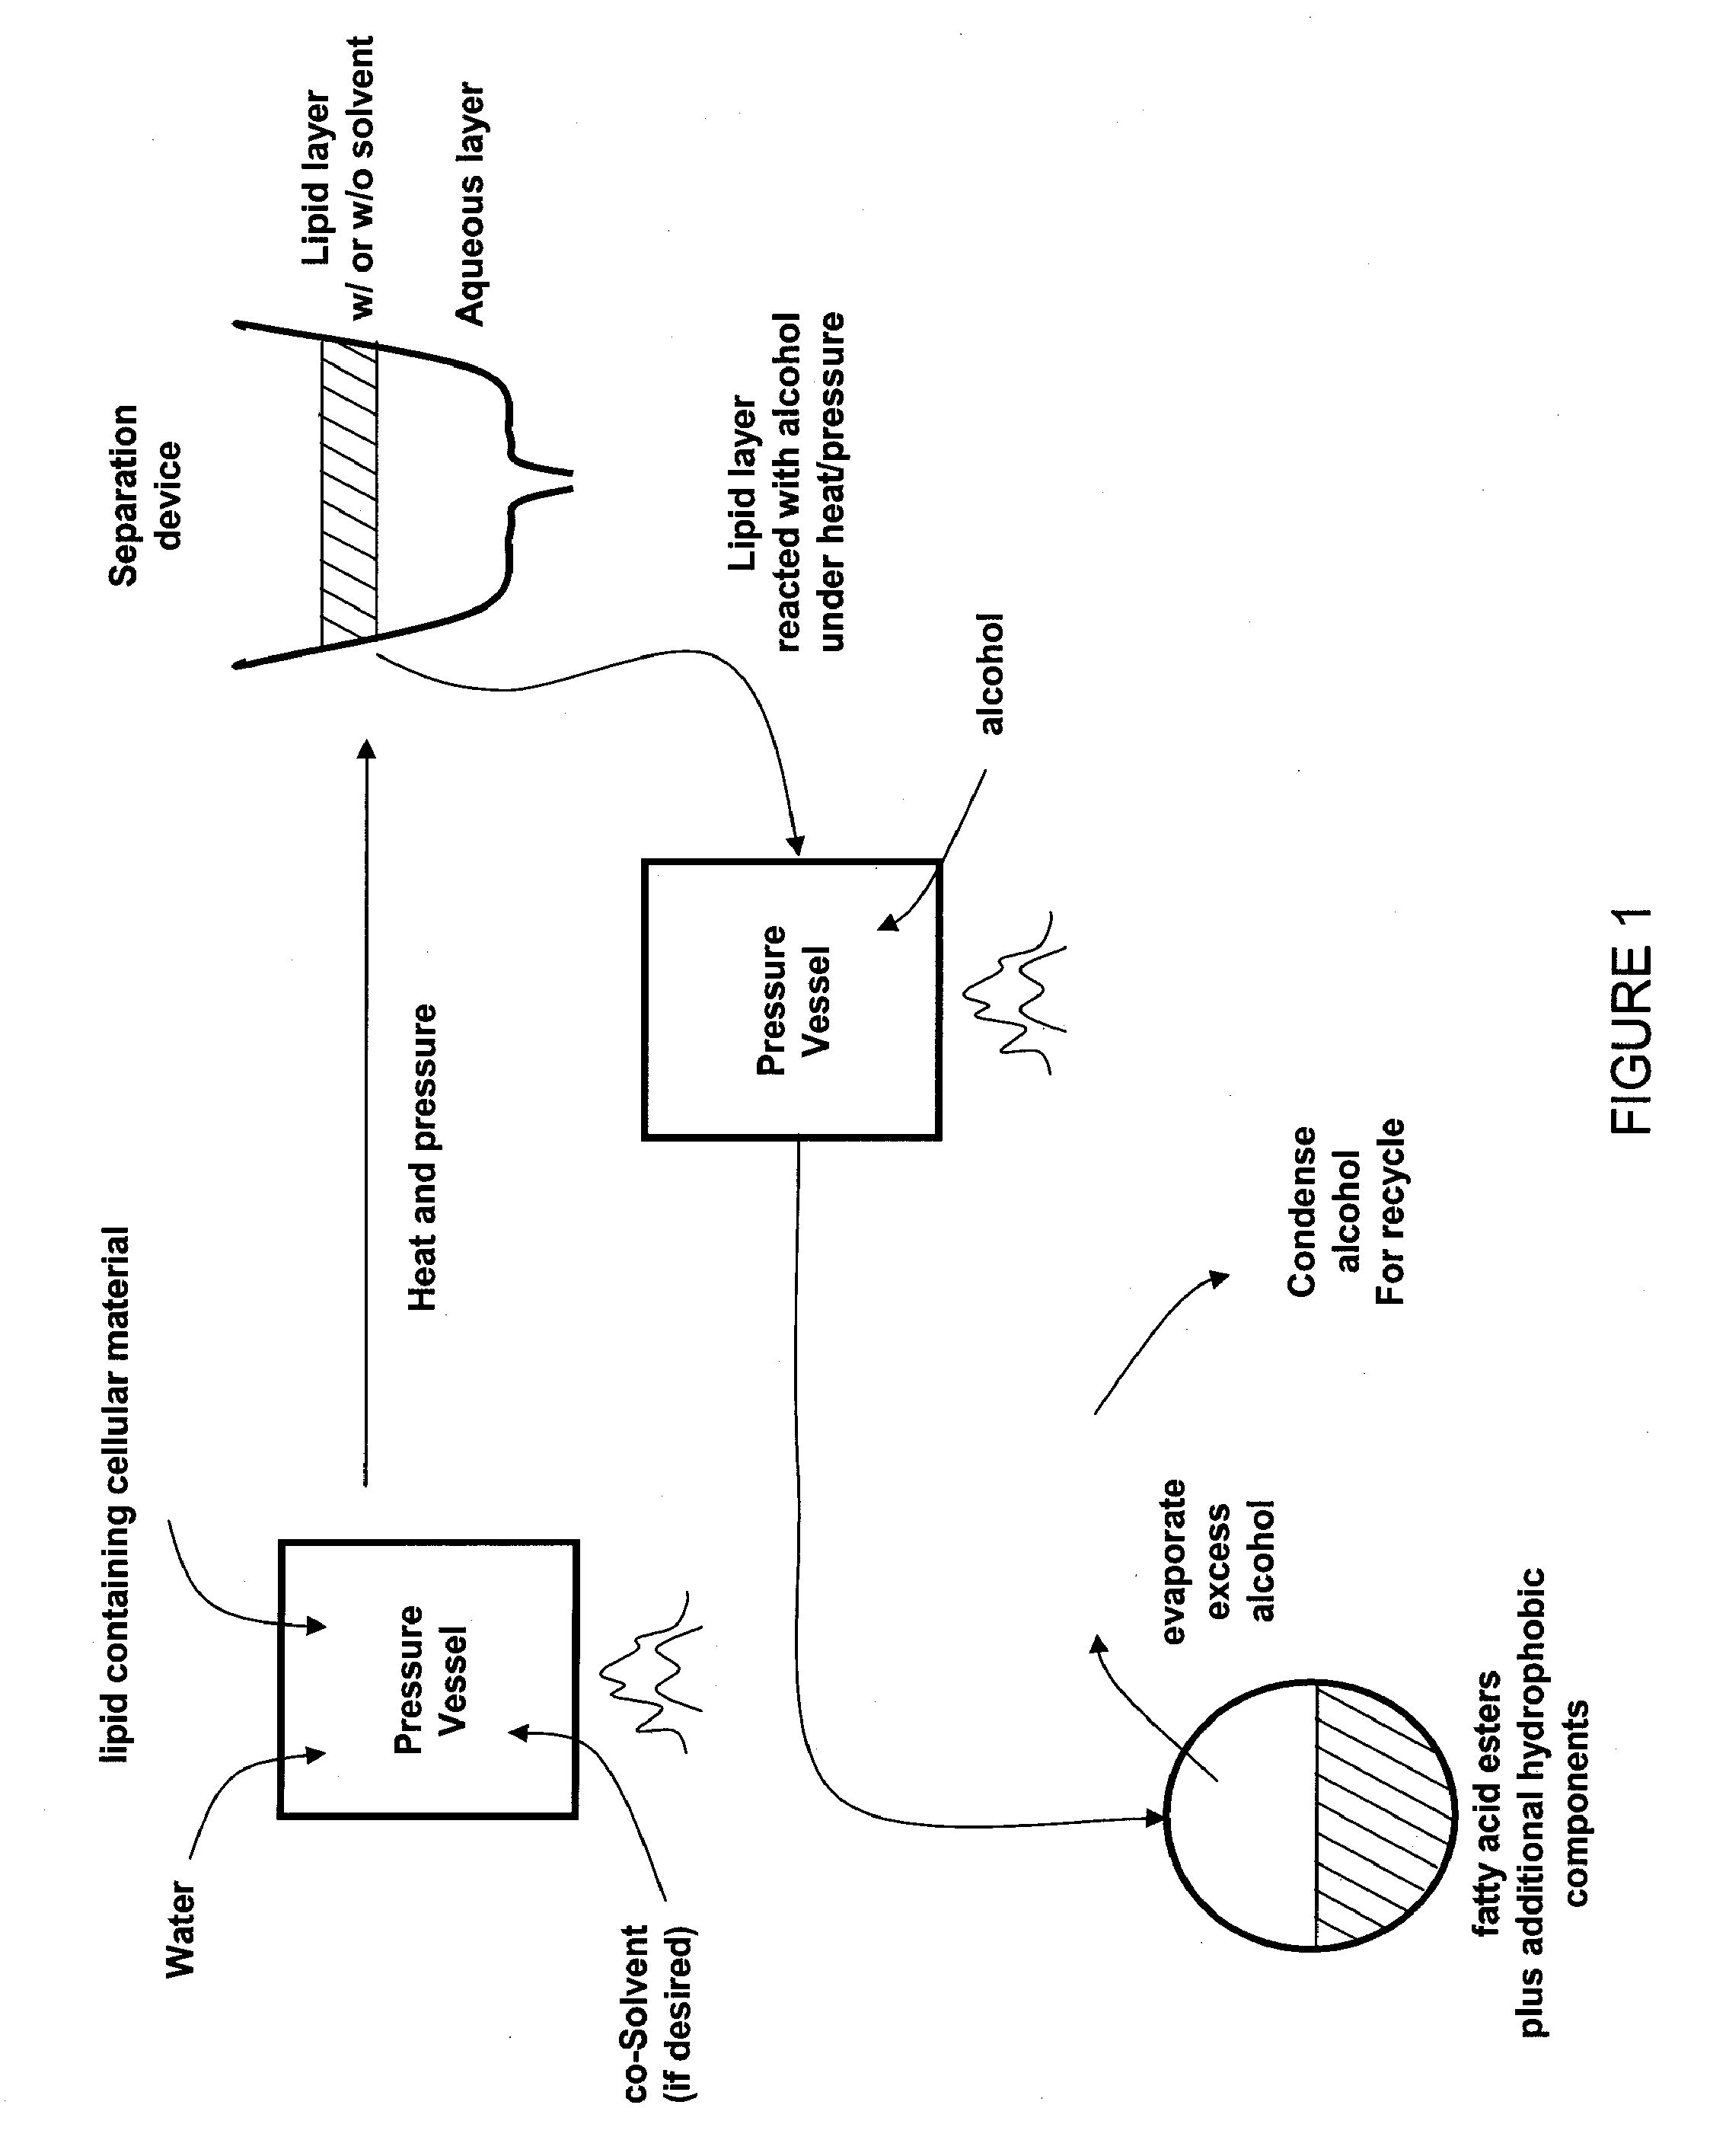 Methods of robust and efficient conversion of cellular lipids to biofuels